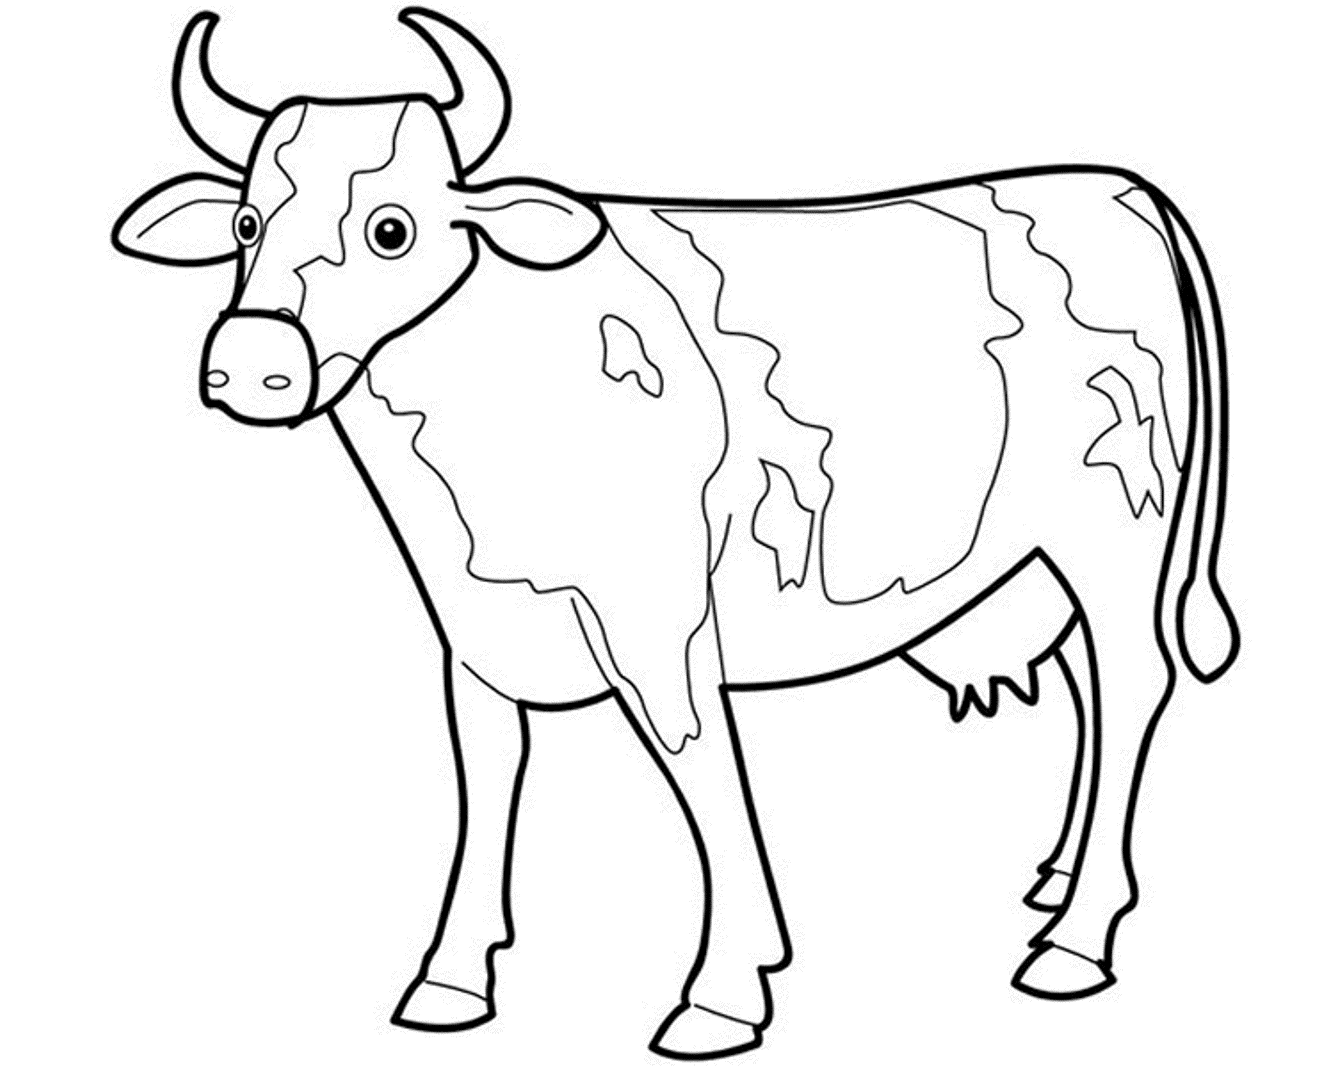 Cow Drawing - Gallery